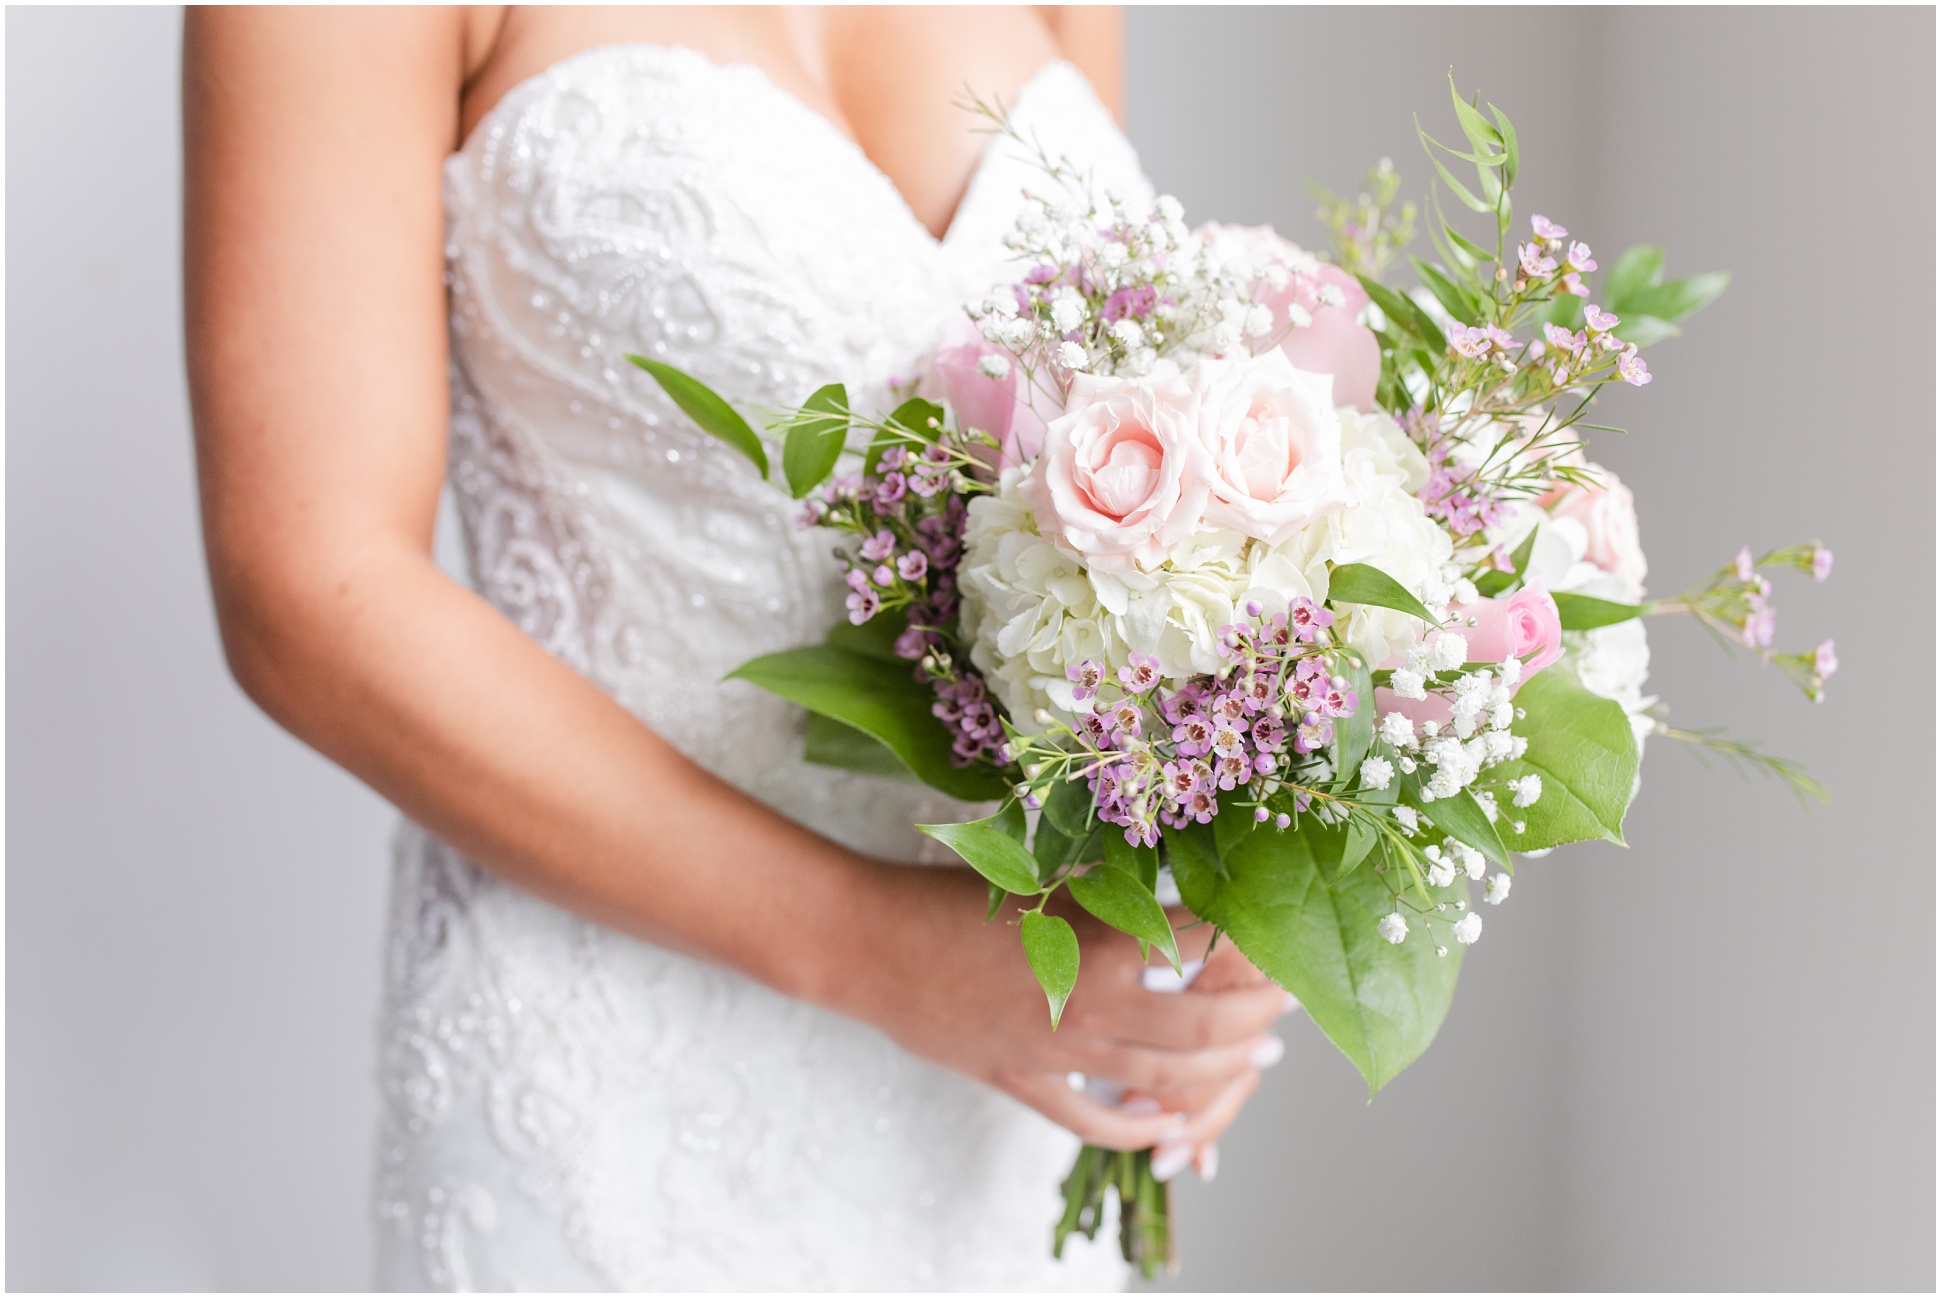 Bride holding floral bouquet on wedding day